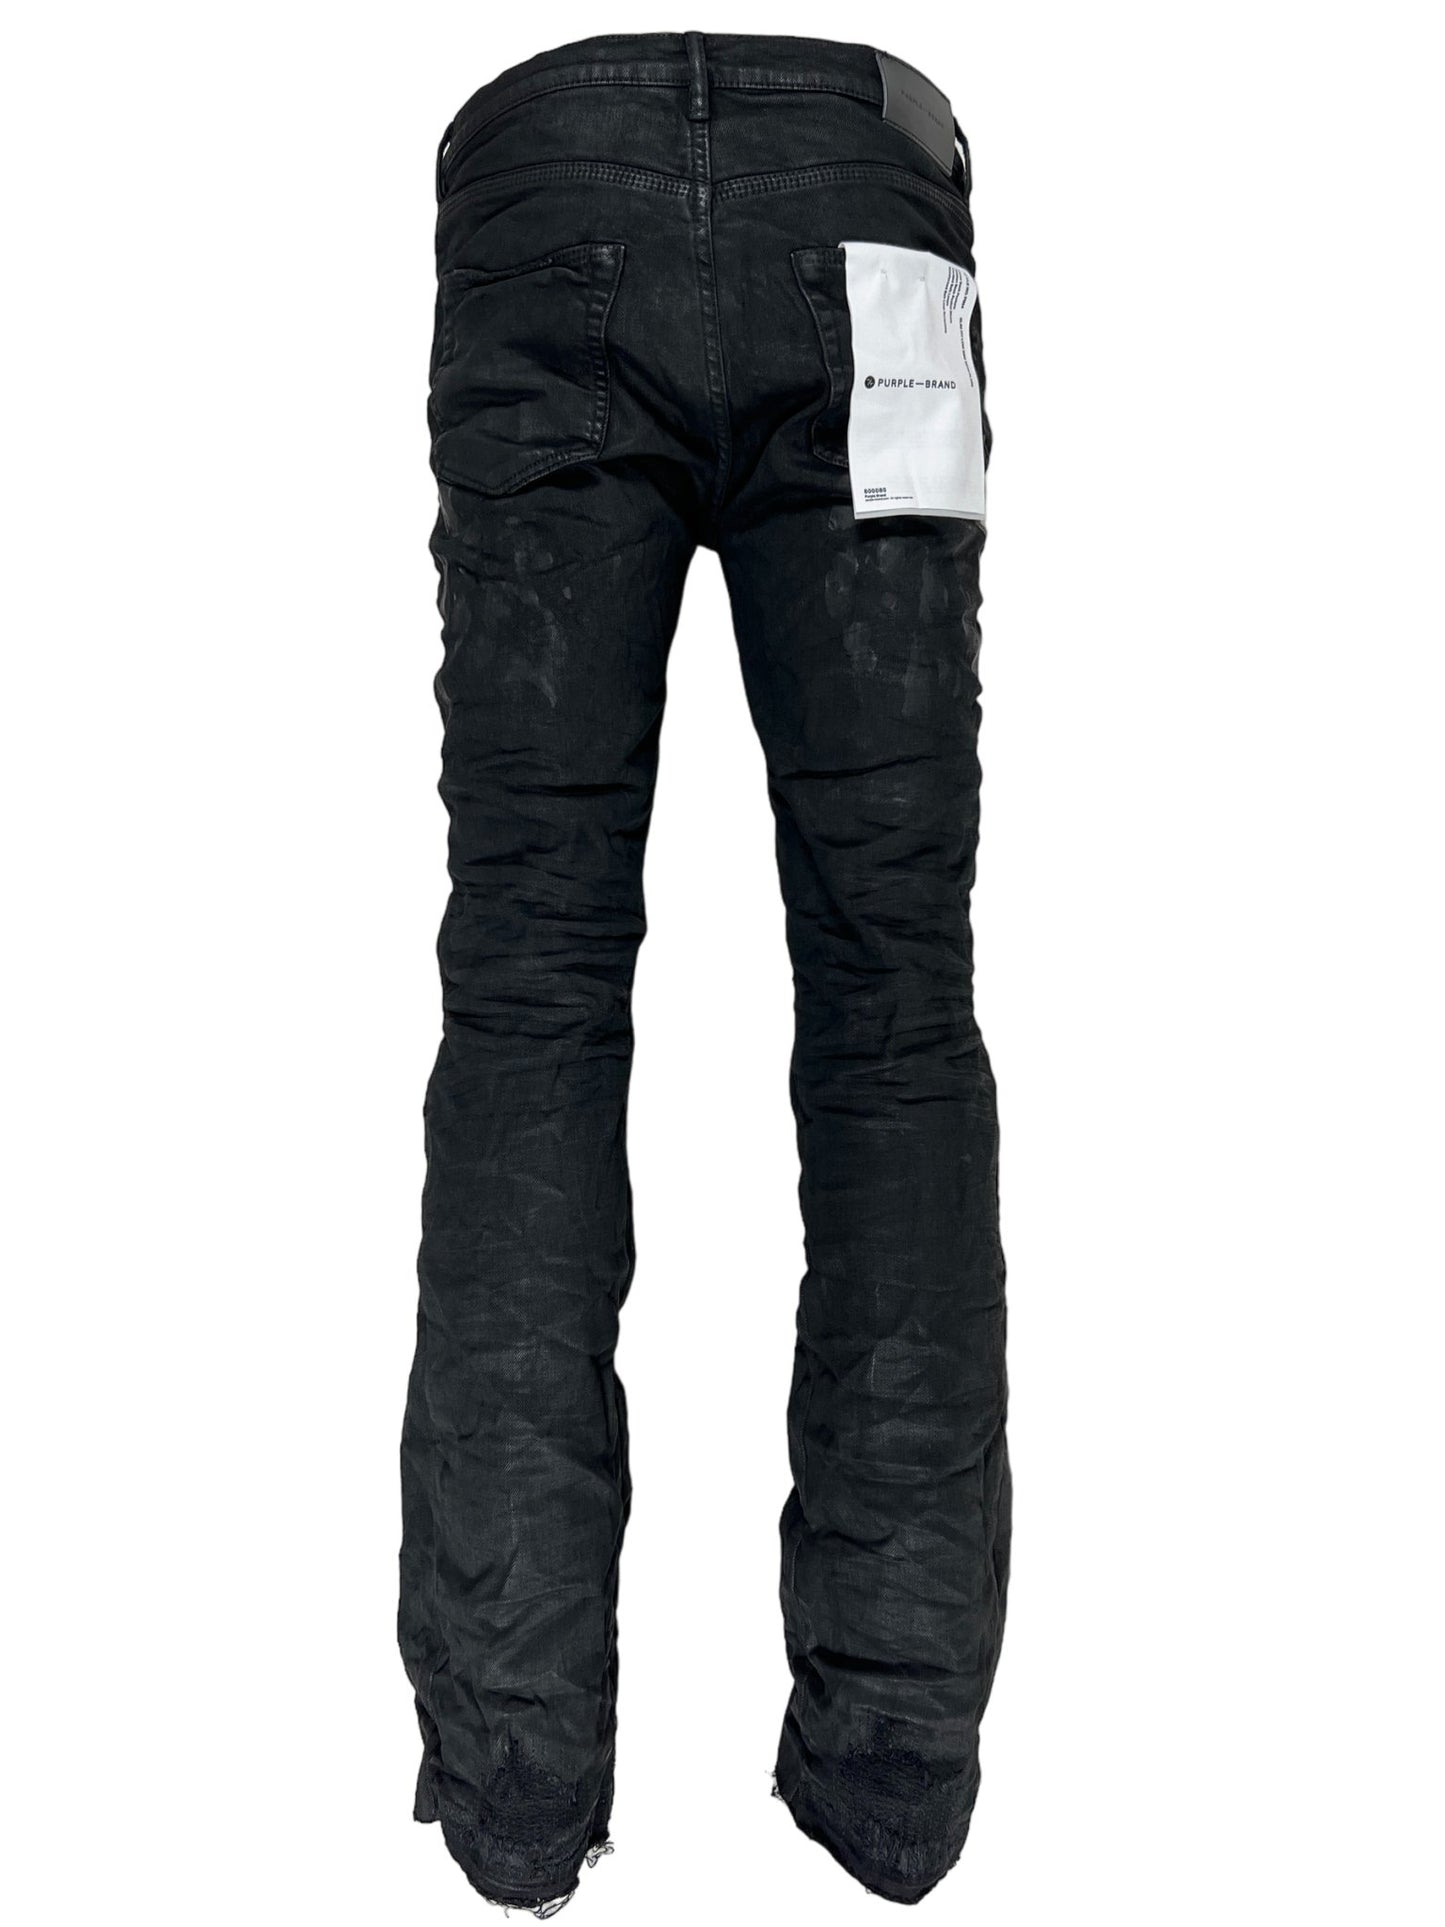 The back view of a pair of Purple Brand Jeans P004-BOPT Double Panels Flare Black.